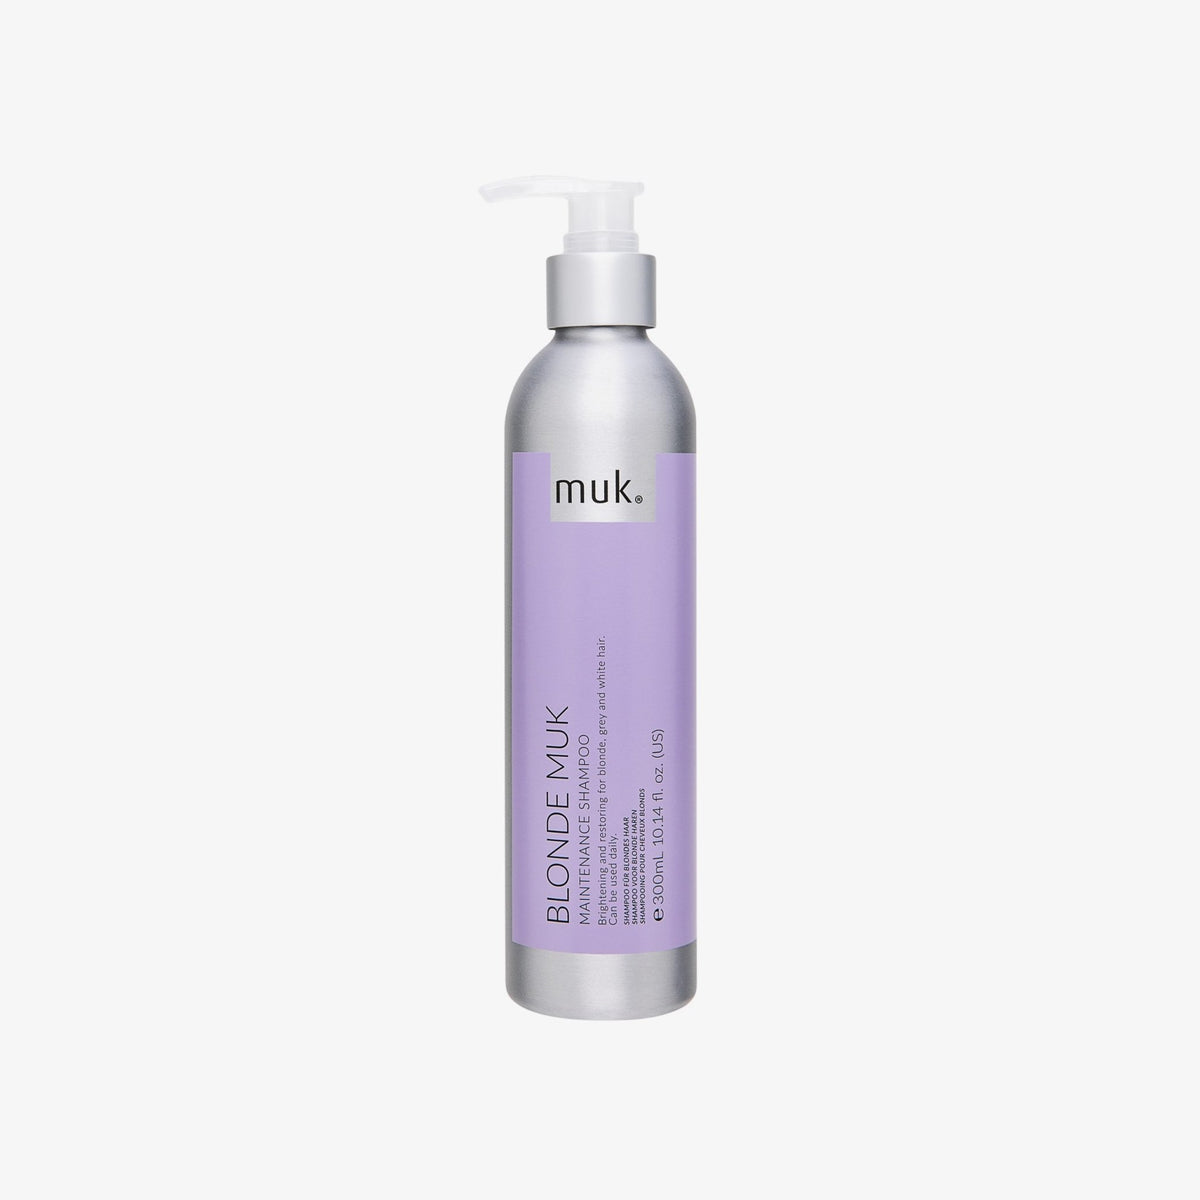 muk Blonde Toning Shampoo - Haircare Superstore